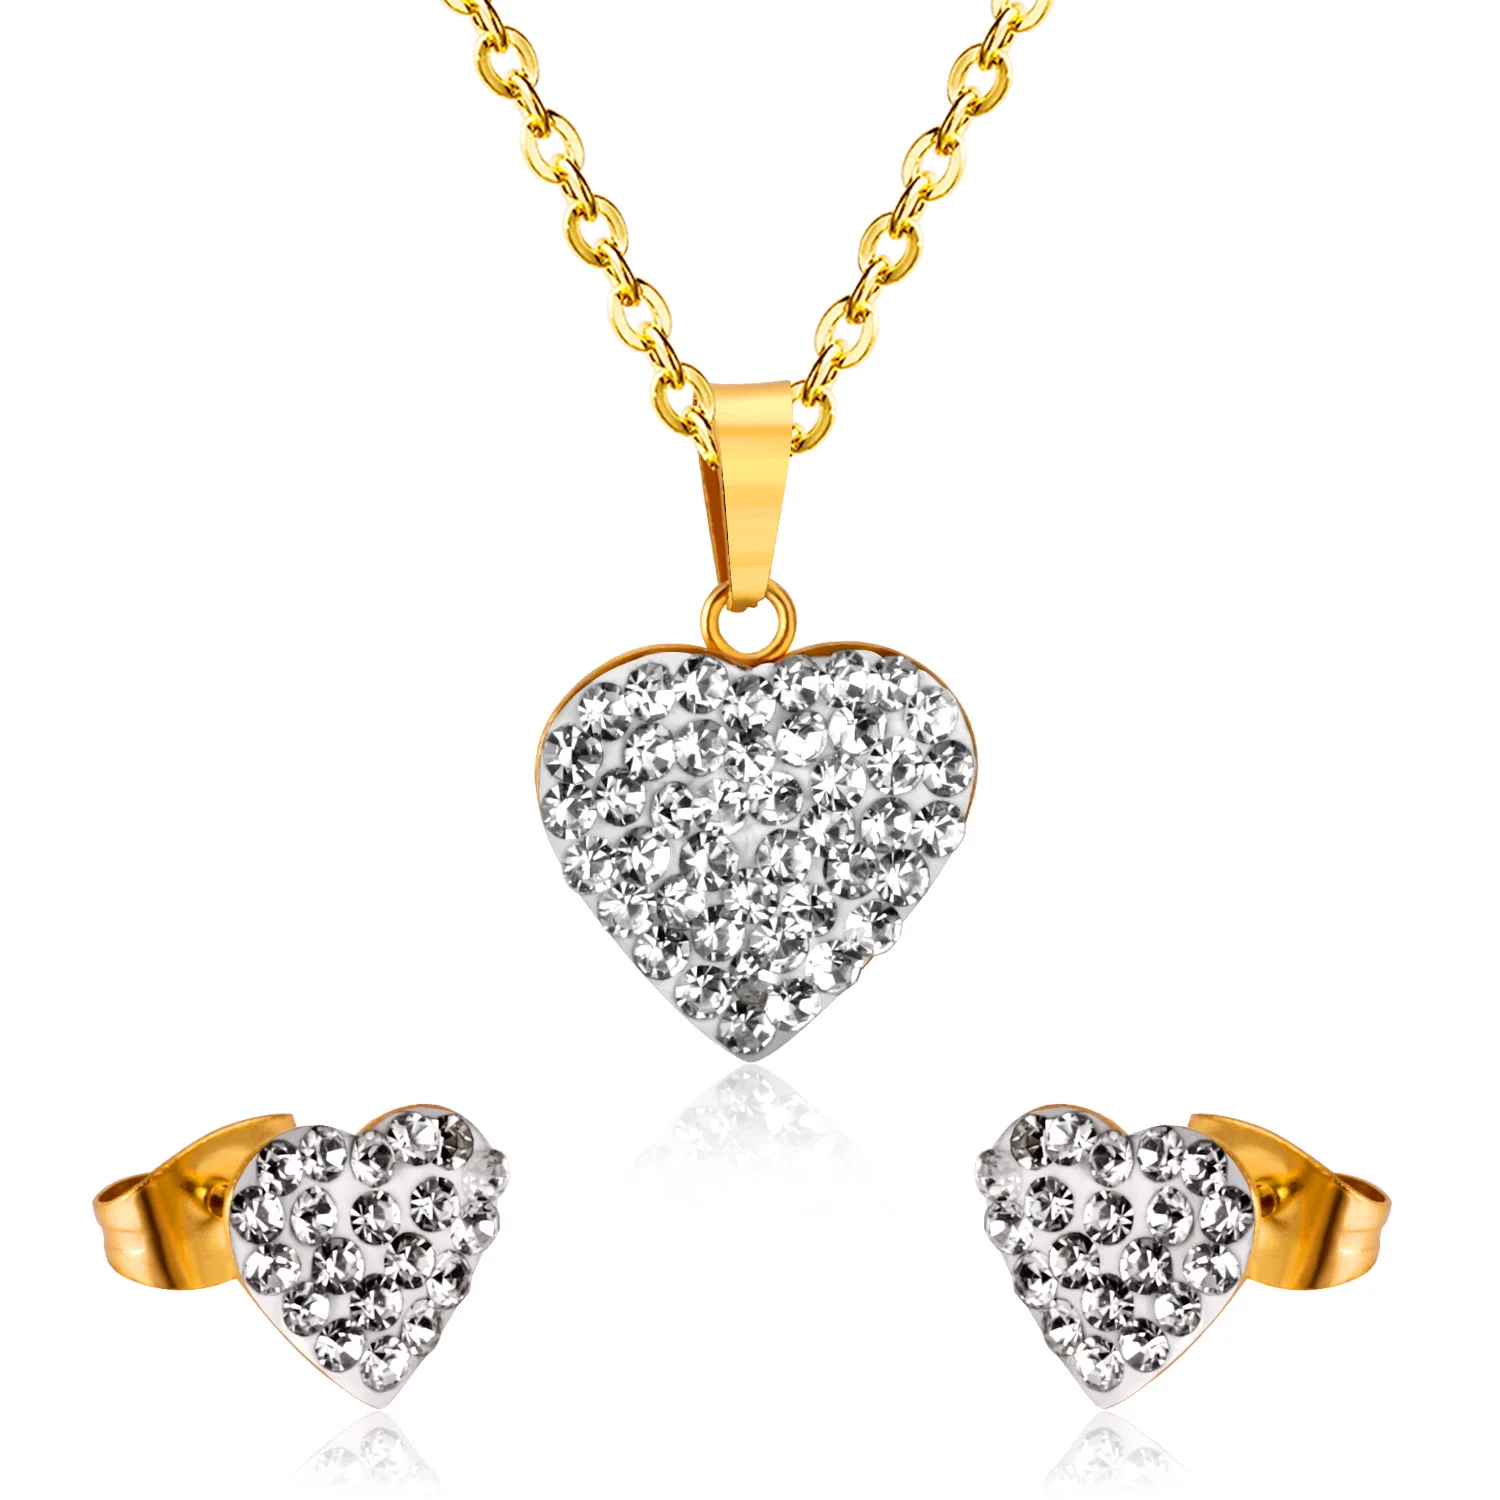 

Asonsteel stainless steel antiallergic silver pendant/earring set 14k gold plated heart shape 3pcs crystal jewelry set, Gold, silver